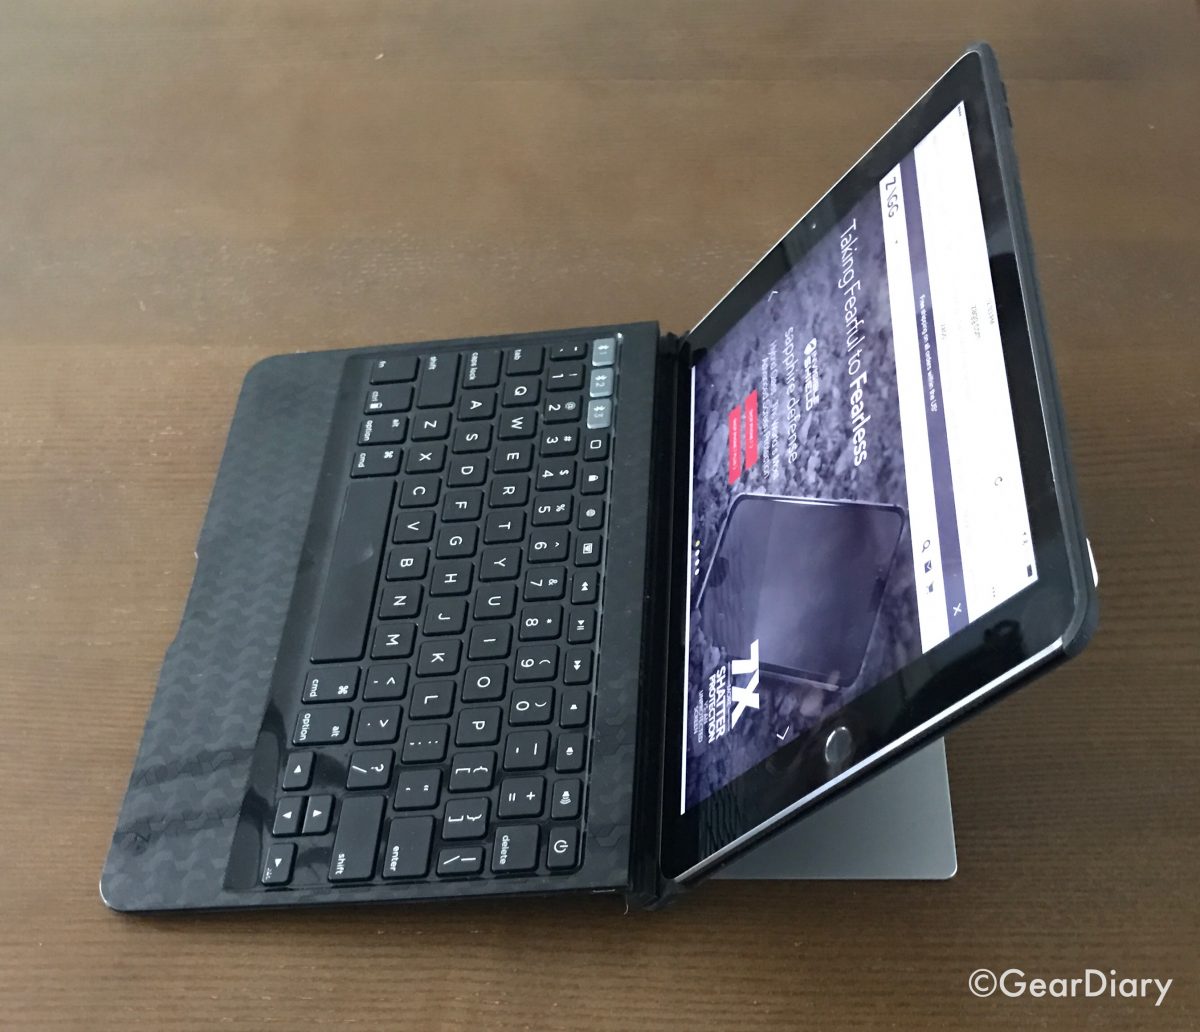 Go Pro with the ZAGG Slim Book Pro Wireless Keyboard and Detachable Case for iPad Pro 9.7”